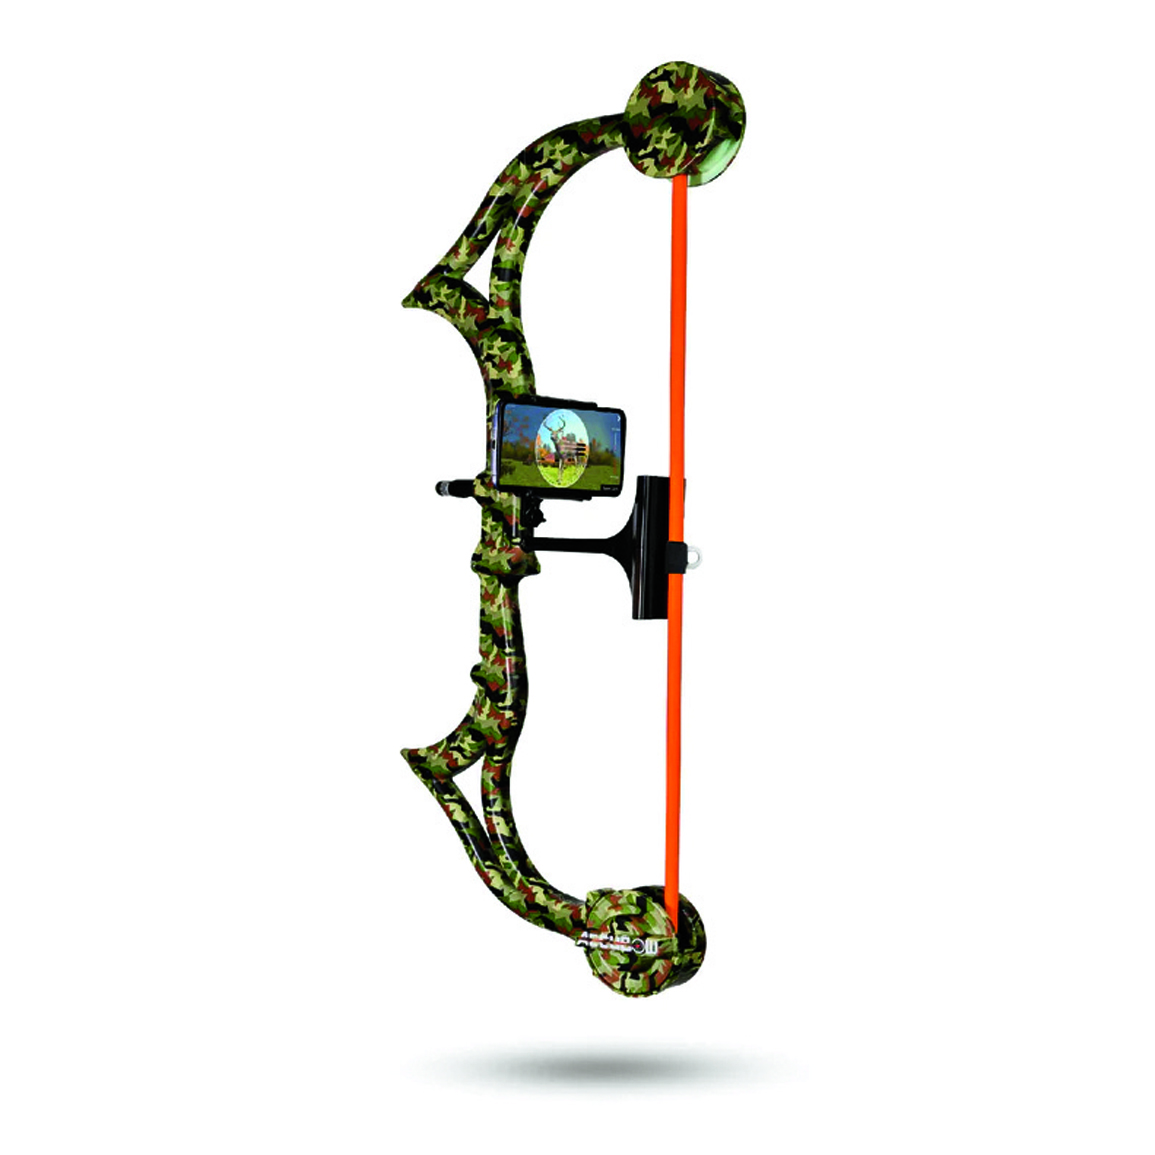 AccuBow 1.0 Forest Camo Archery Trainer